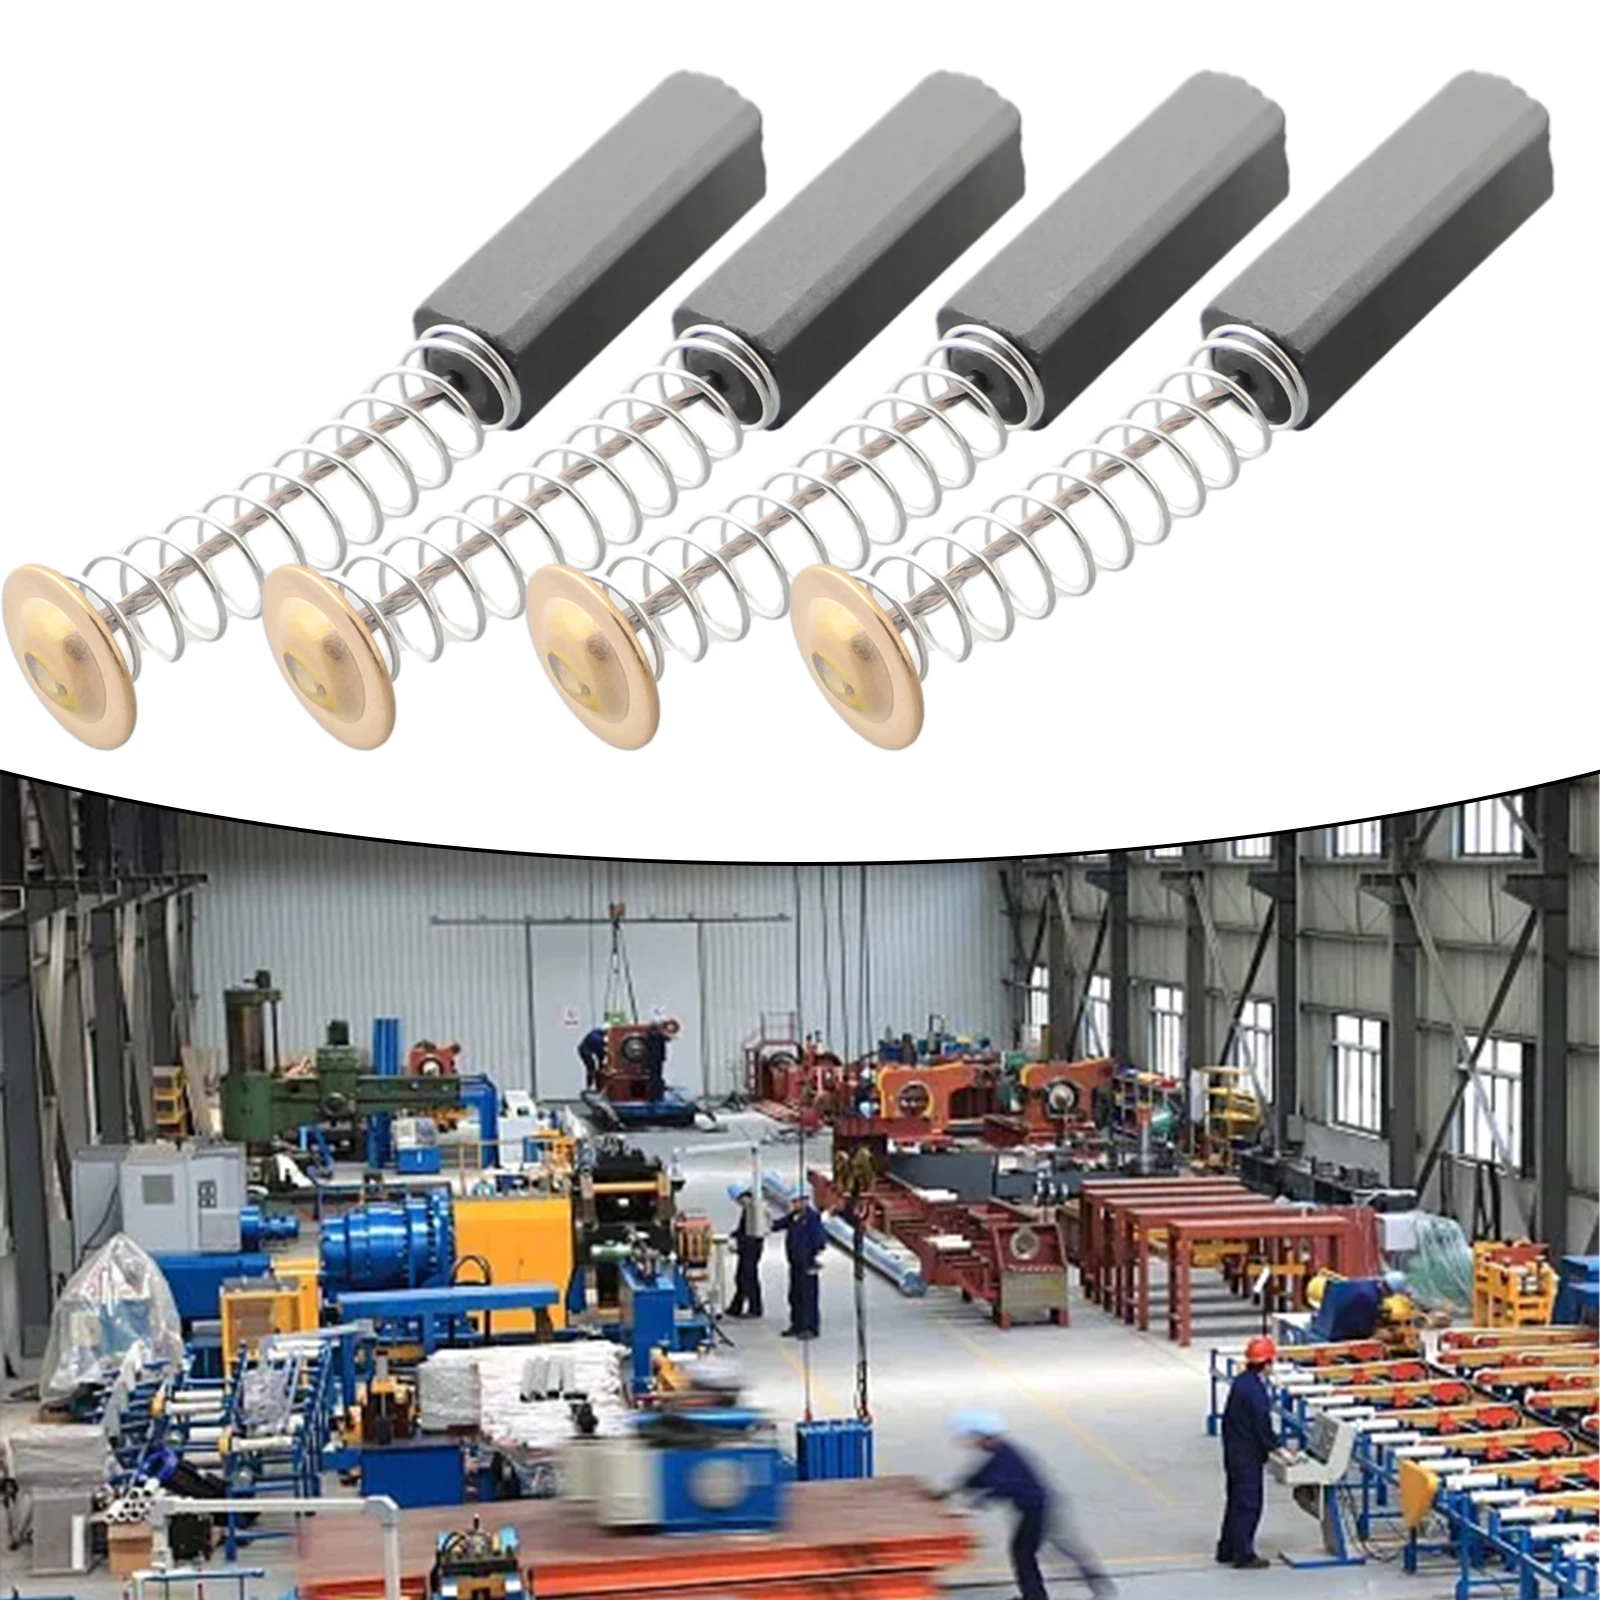 Carbon Brushes Motor Carbon Brushes Tool Automation Braking Carbon Drives Durability Electric Mechanical Power nbsanminse v 2 m5 v 3 m5 2 2 2 3 way mechnical valve festo airtac smc air valve automation production line tool